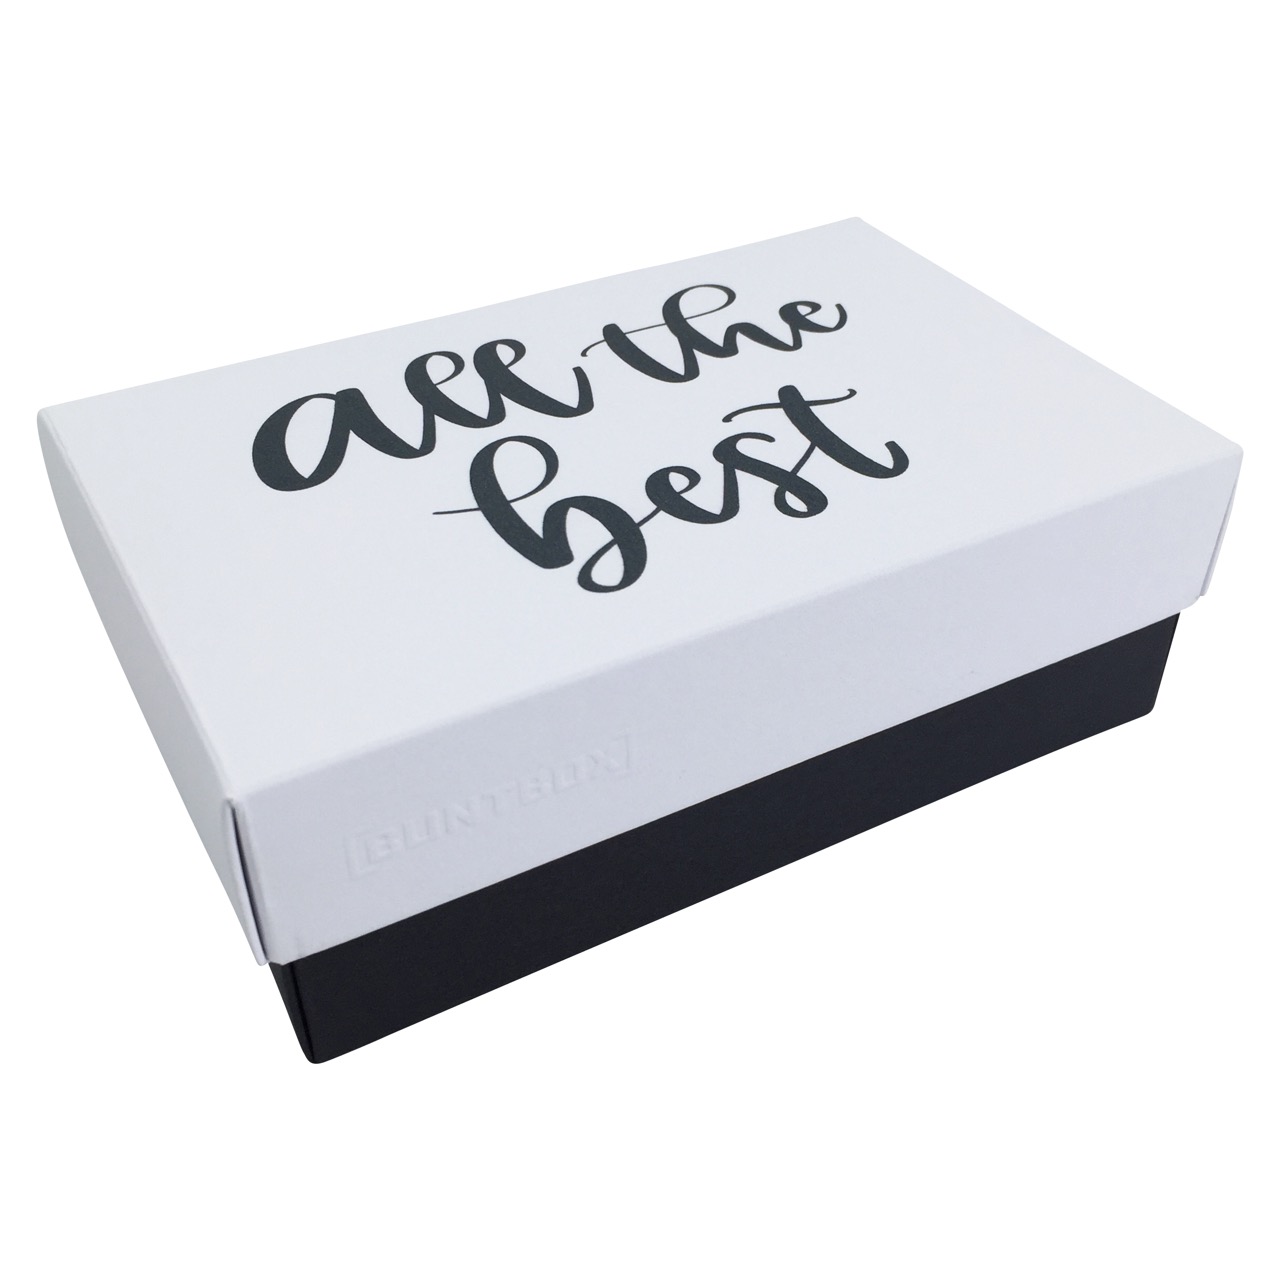 Buntbox XL Lettering all the best in Diamant-Graphit